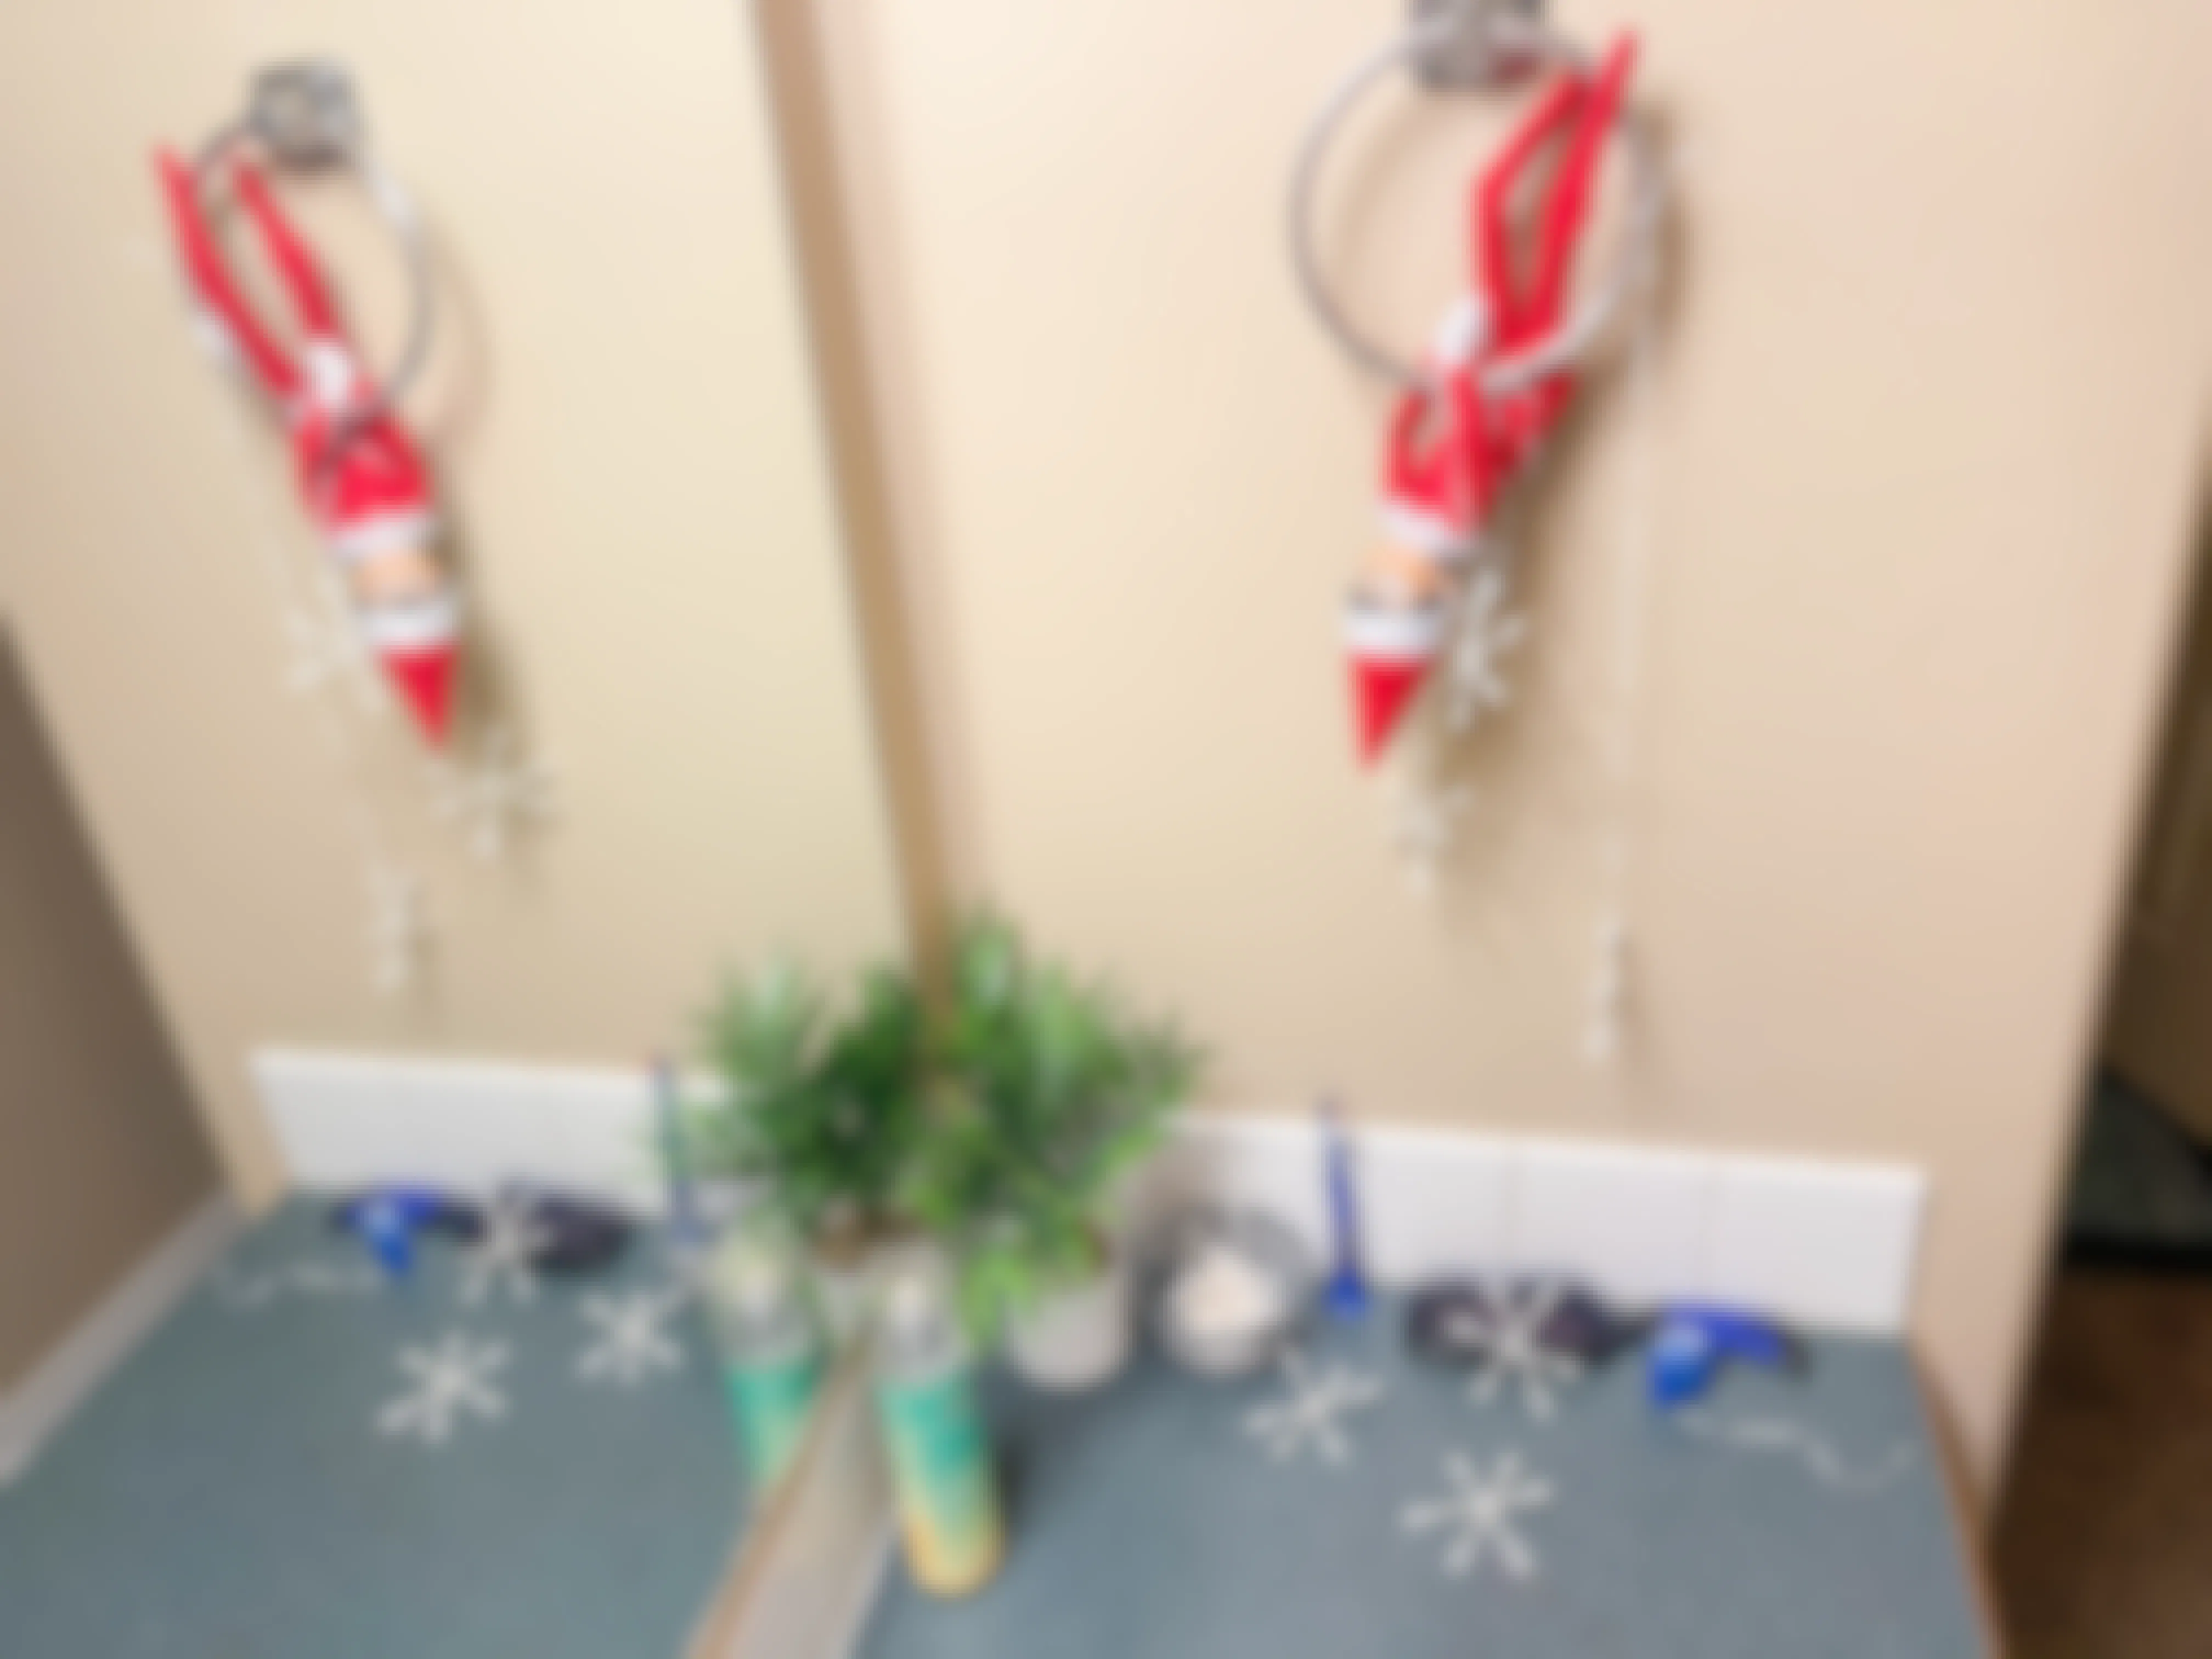 an elf on the shelf doll hanging upside down on towel ring in bathroom with qtip snowflakes around counter